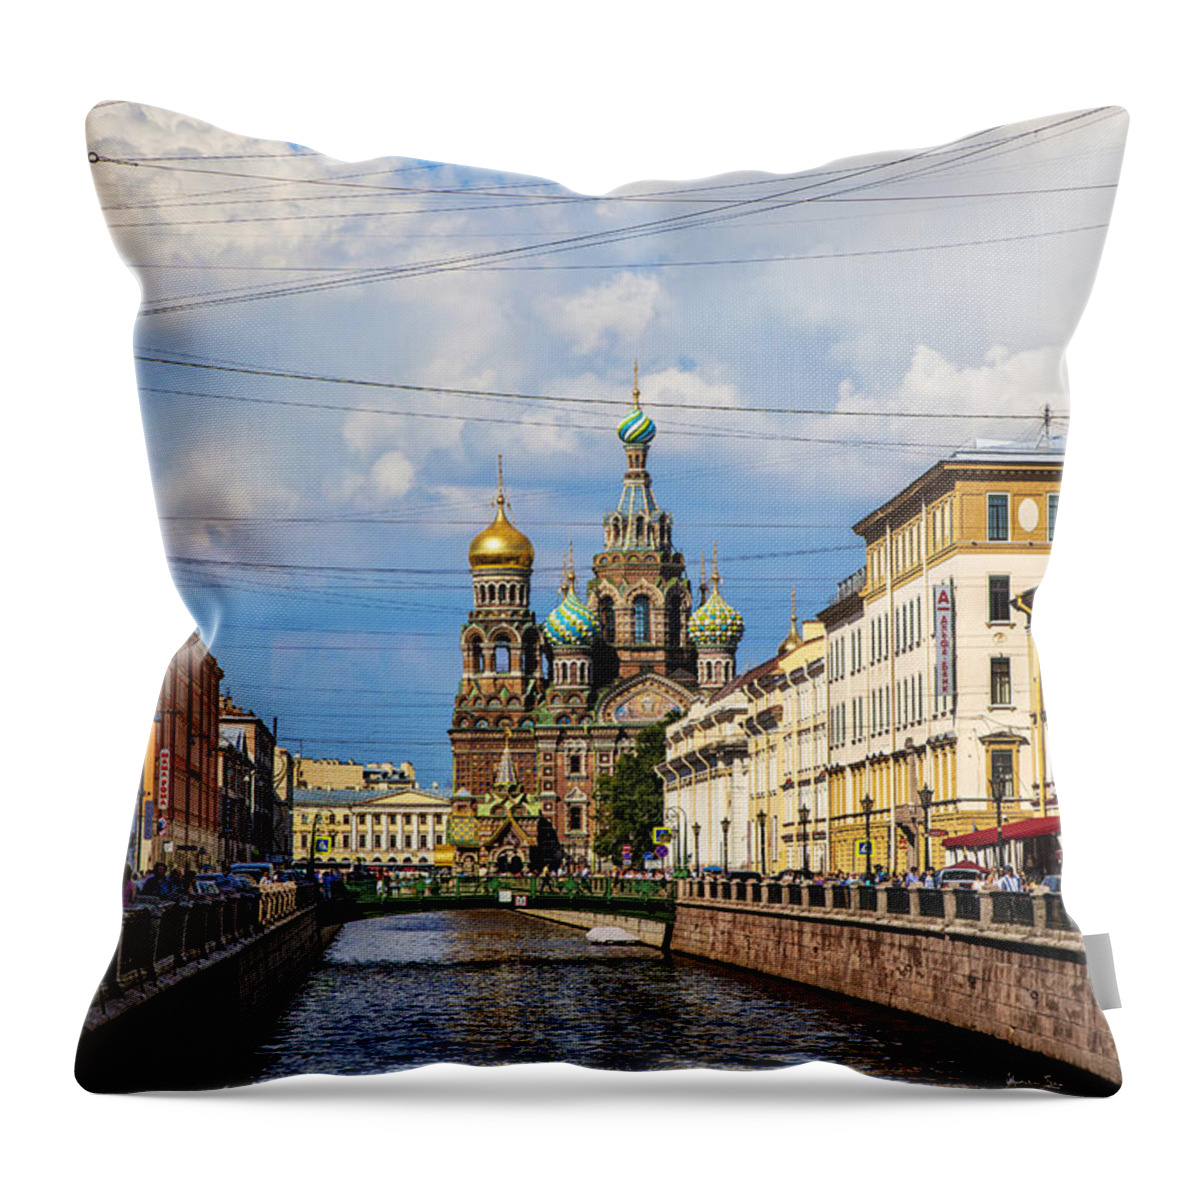 Church Throw Pillow featuring the photograph The Church Of Our Savior On Spilled Blood - St. Petersburg, Russia by Madeline Ellis